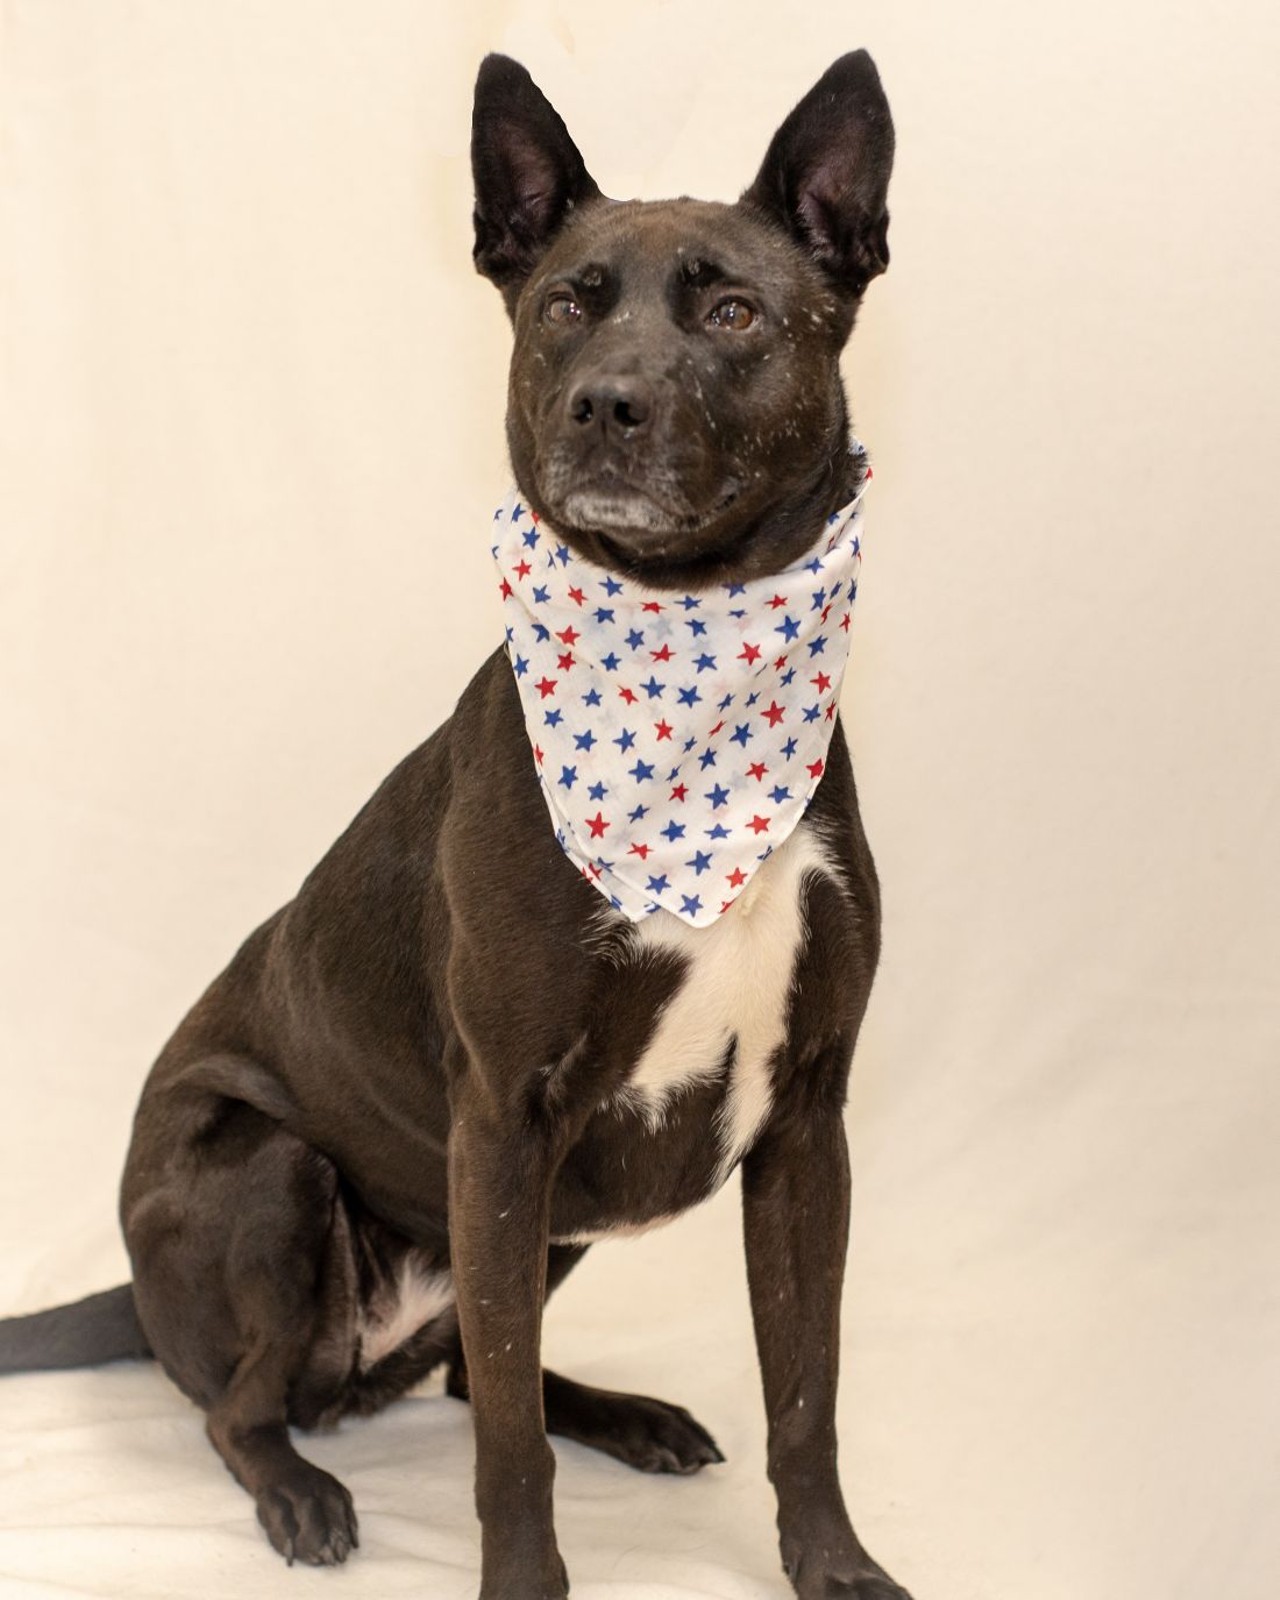 NAME: Americana
GENDER: Female
BREED: Shepherd-Cattle Dog-Pit Bull mix
AGE: 3 years
WEIGHT: 52 pounds
SPECIAL CONSIDERATIONS: Americana prefers a home with no cats and older or no children.
REASON I CAME TO MHS: Agency transfer
LOCATION: Petco of Sterling Heights
ID NUMBER: 869073